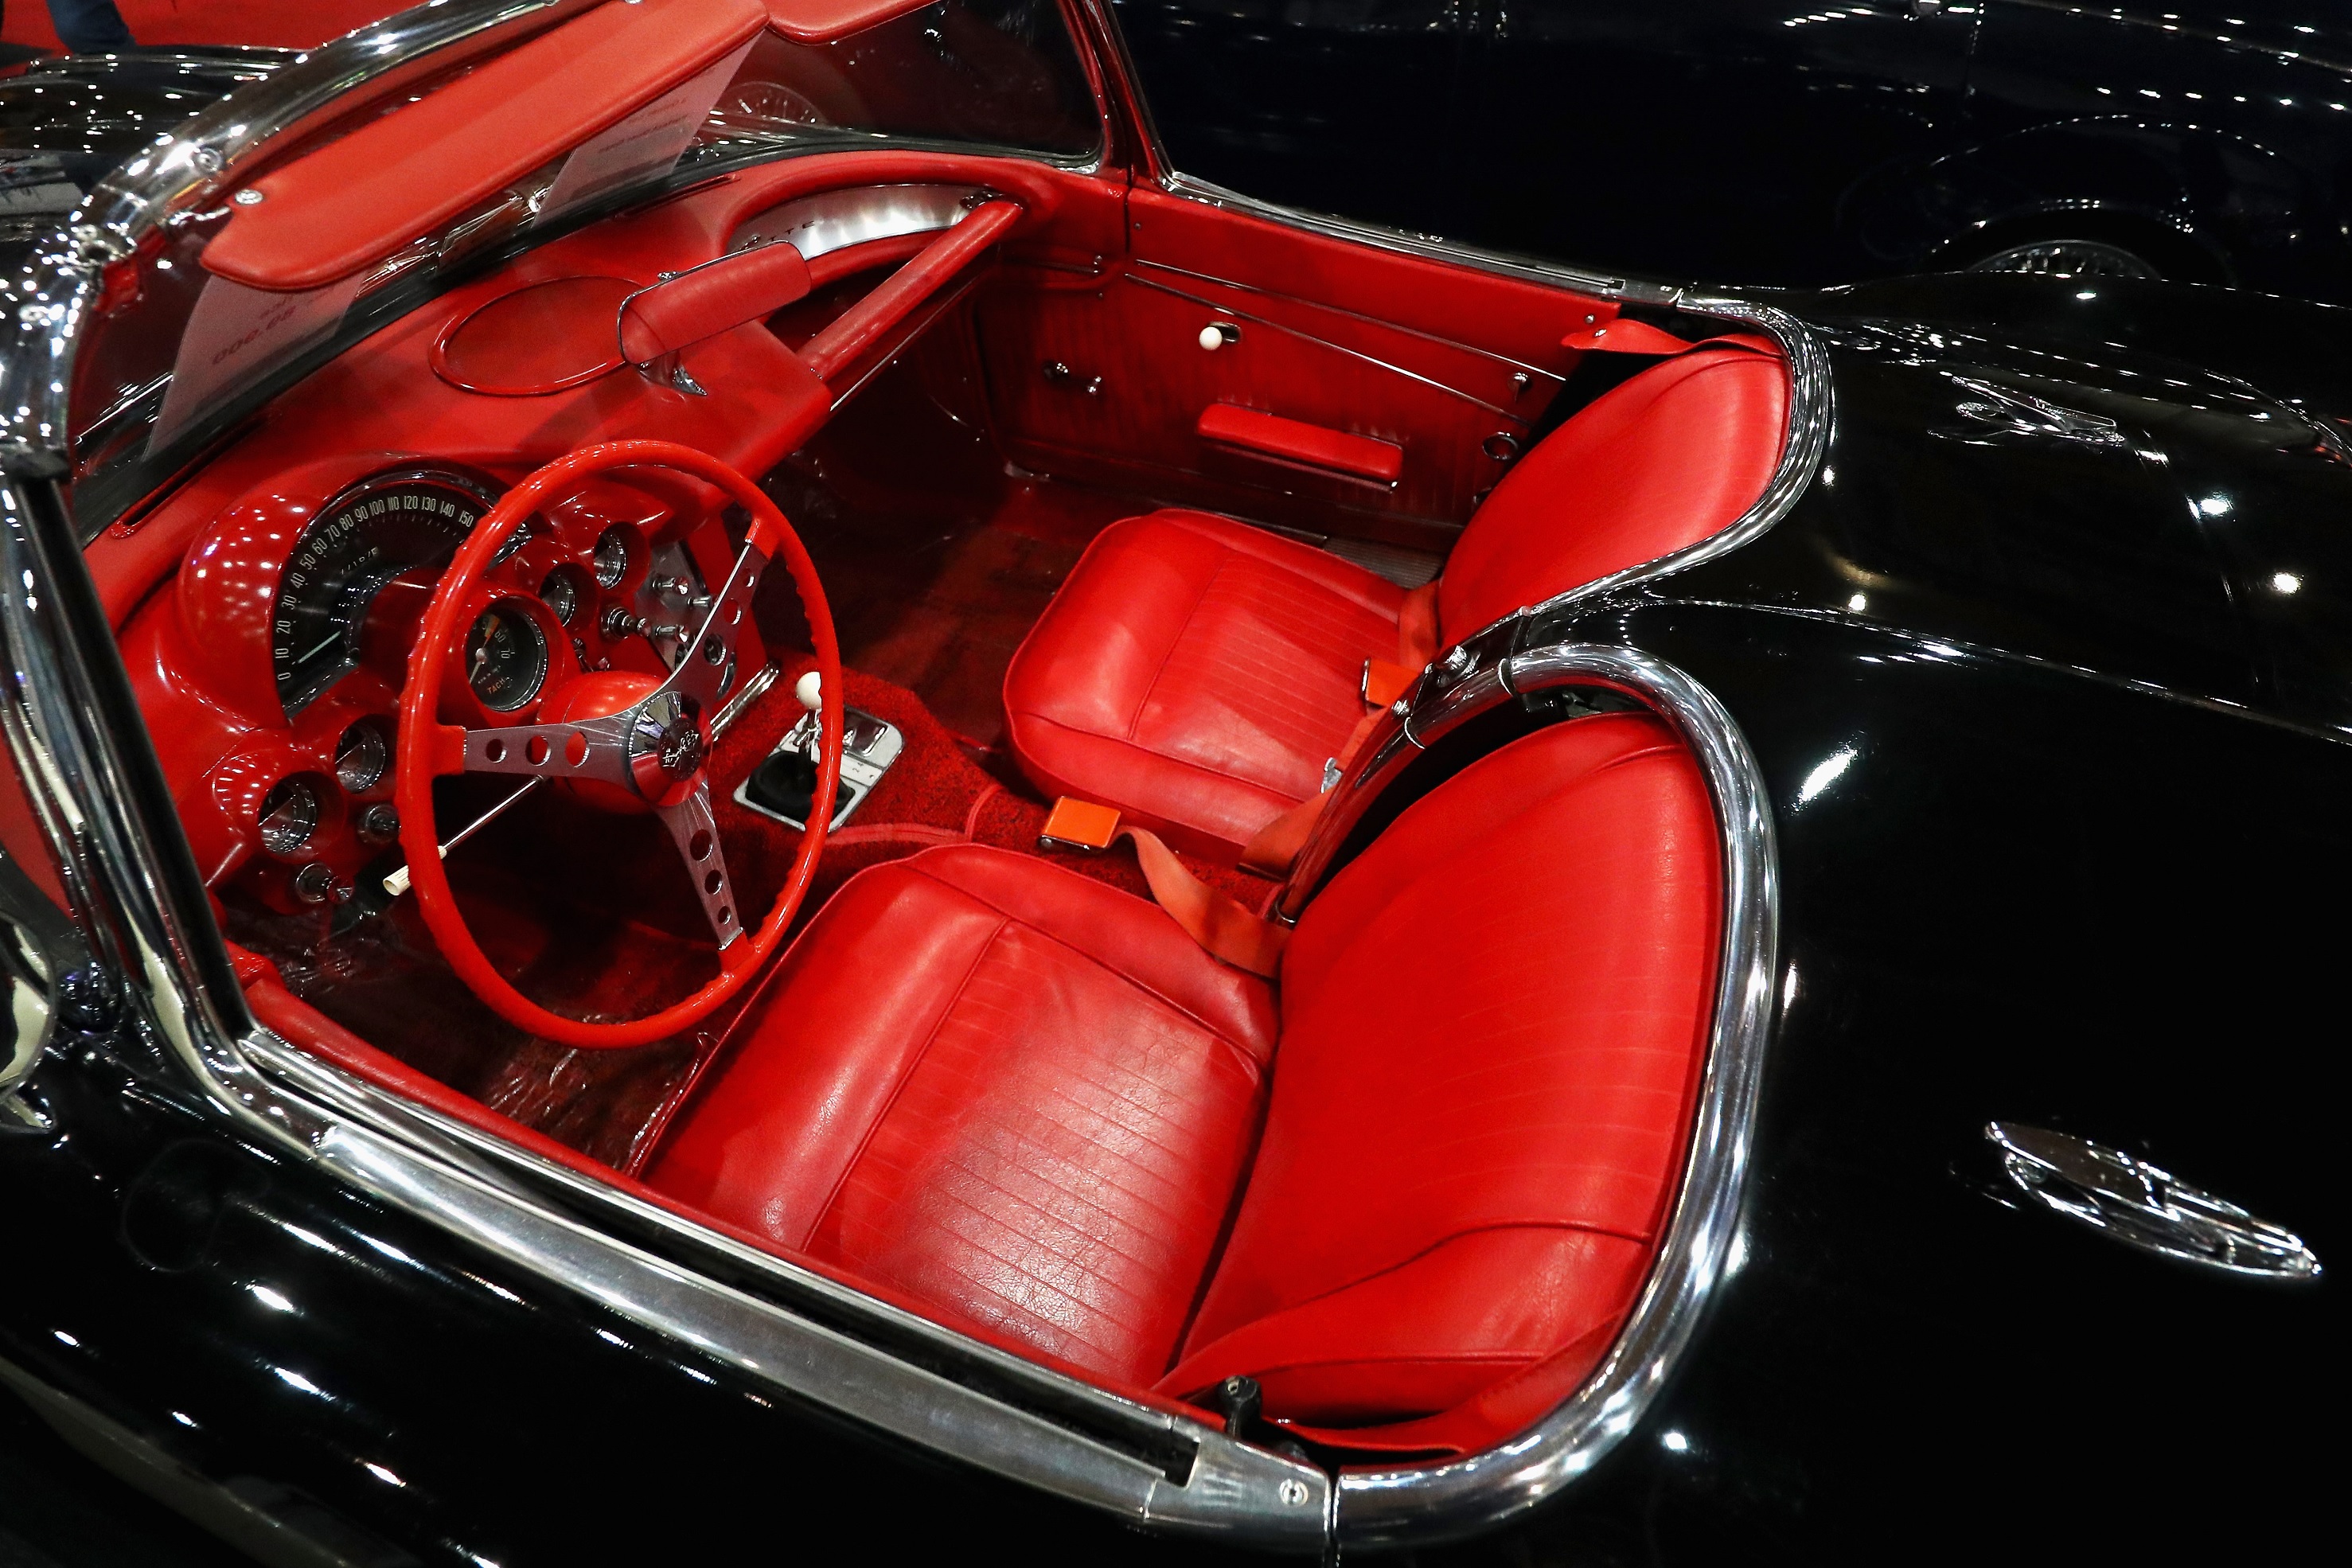 The red-leather interior of a black 1962 Chevrolet Corvette